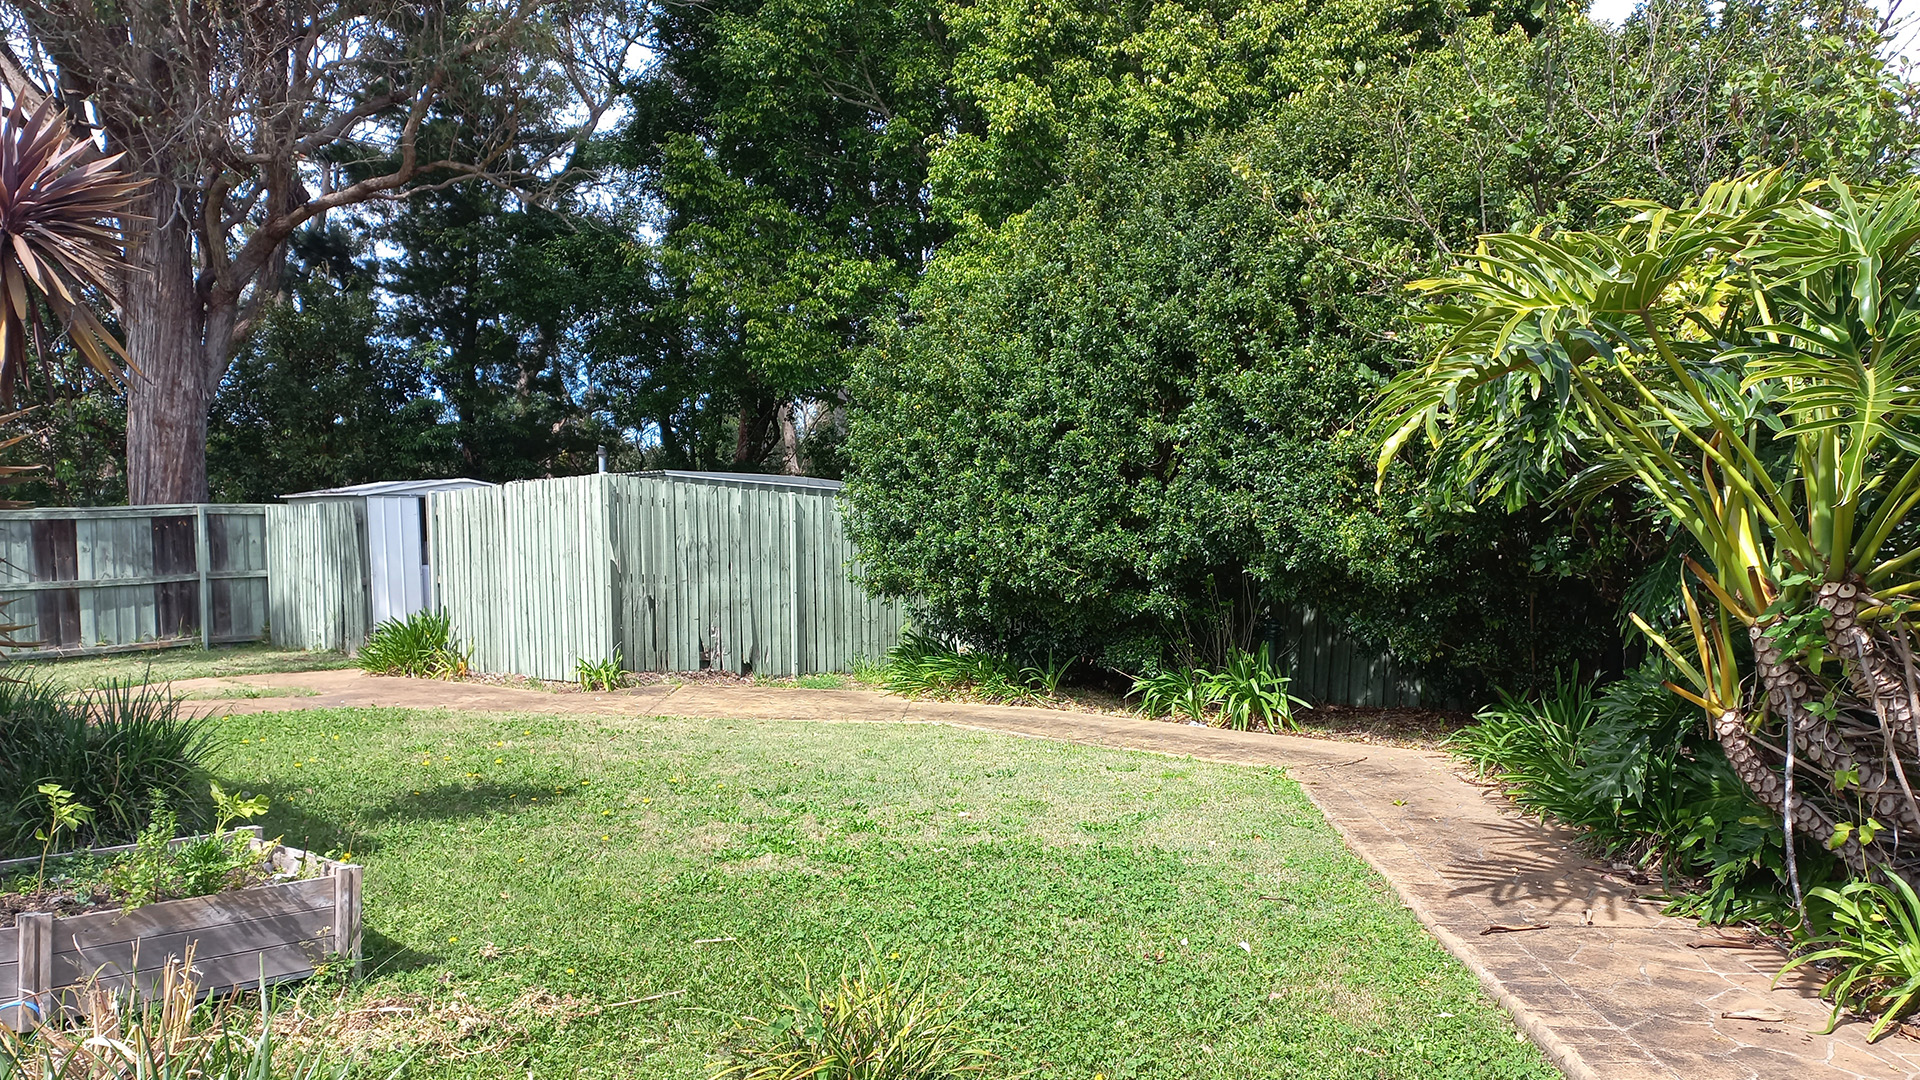 A view of a grassed backyard with a fence and large trees.